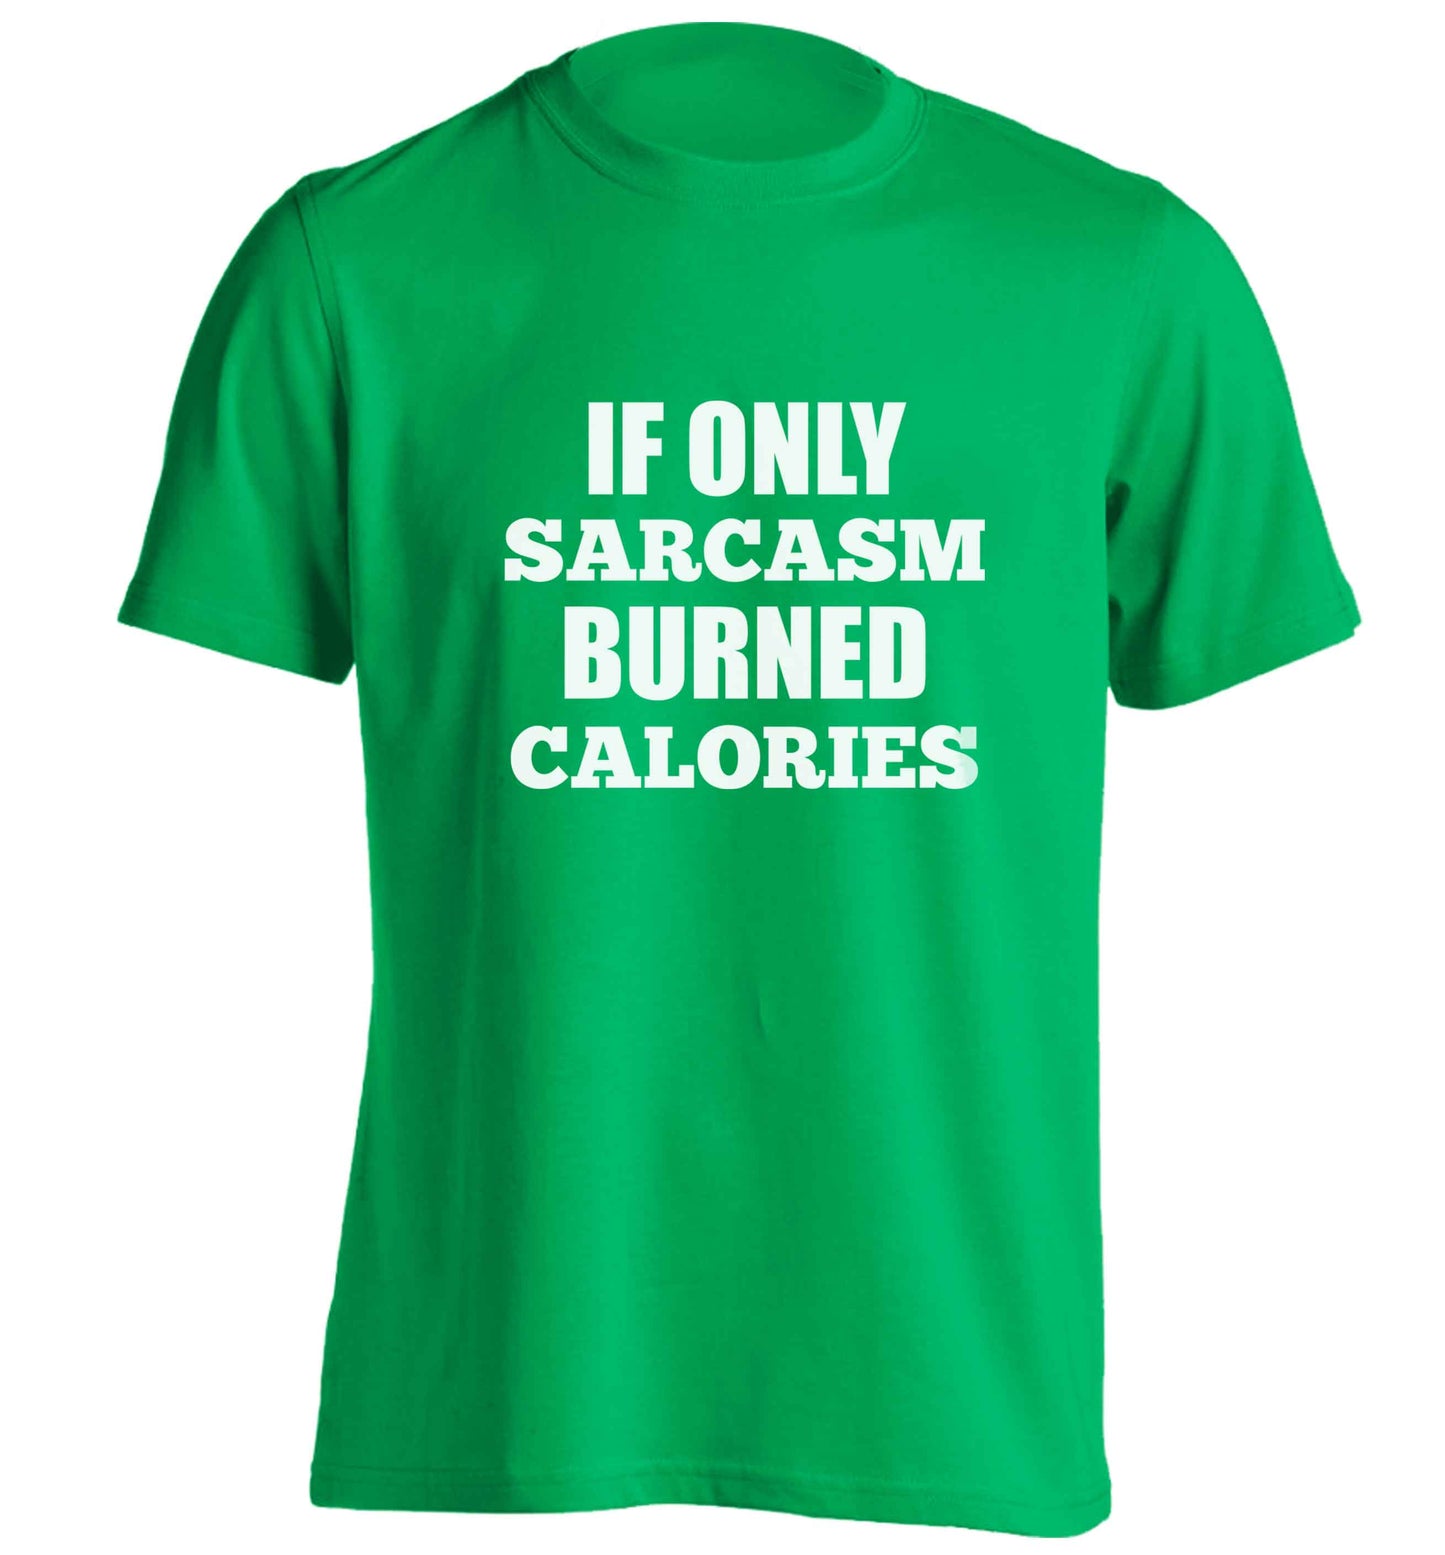 If only sarcasm burned calories adults unisex green Tshirt 2XL